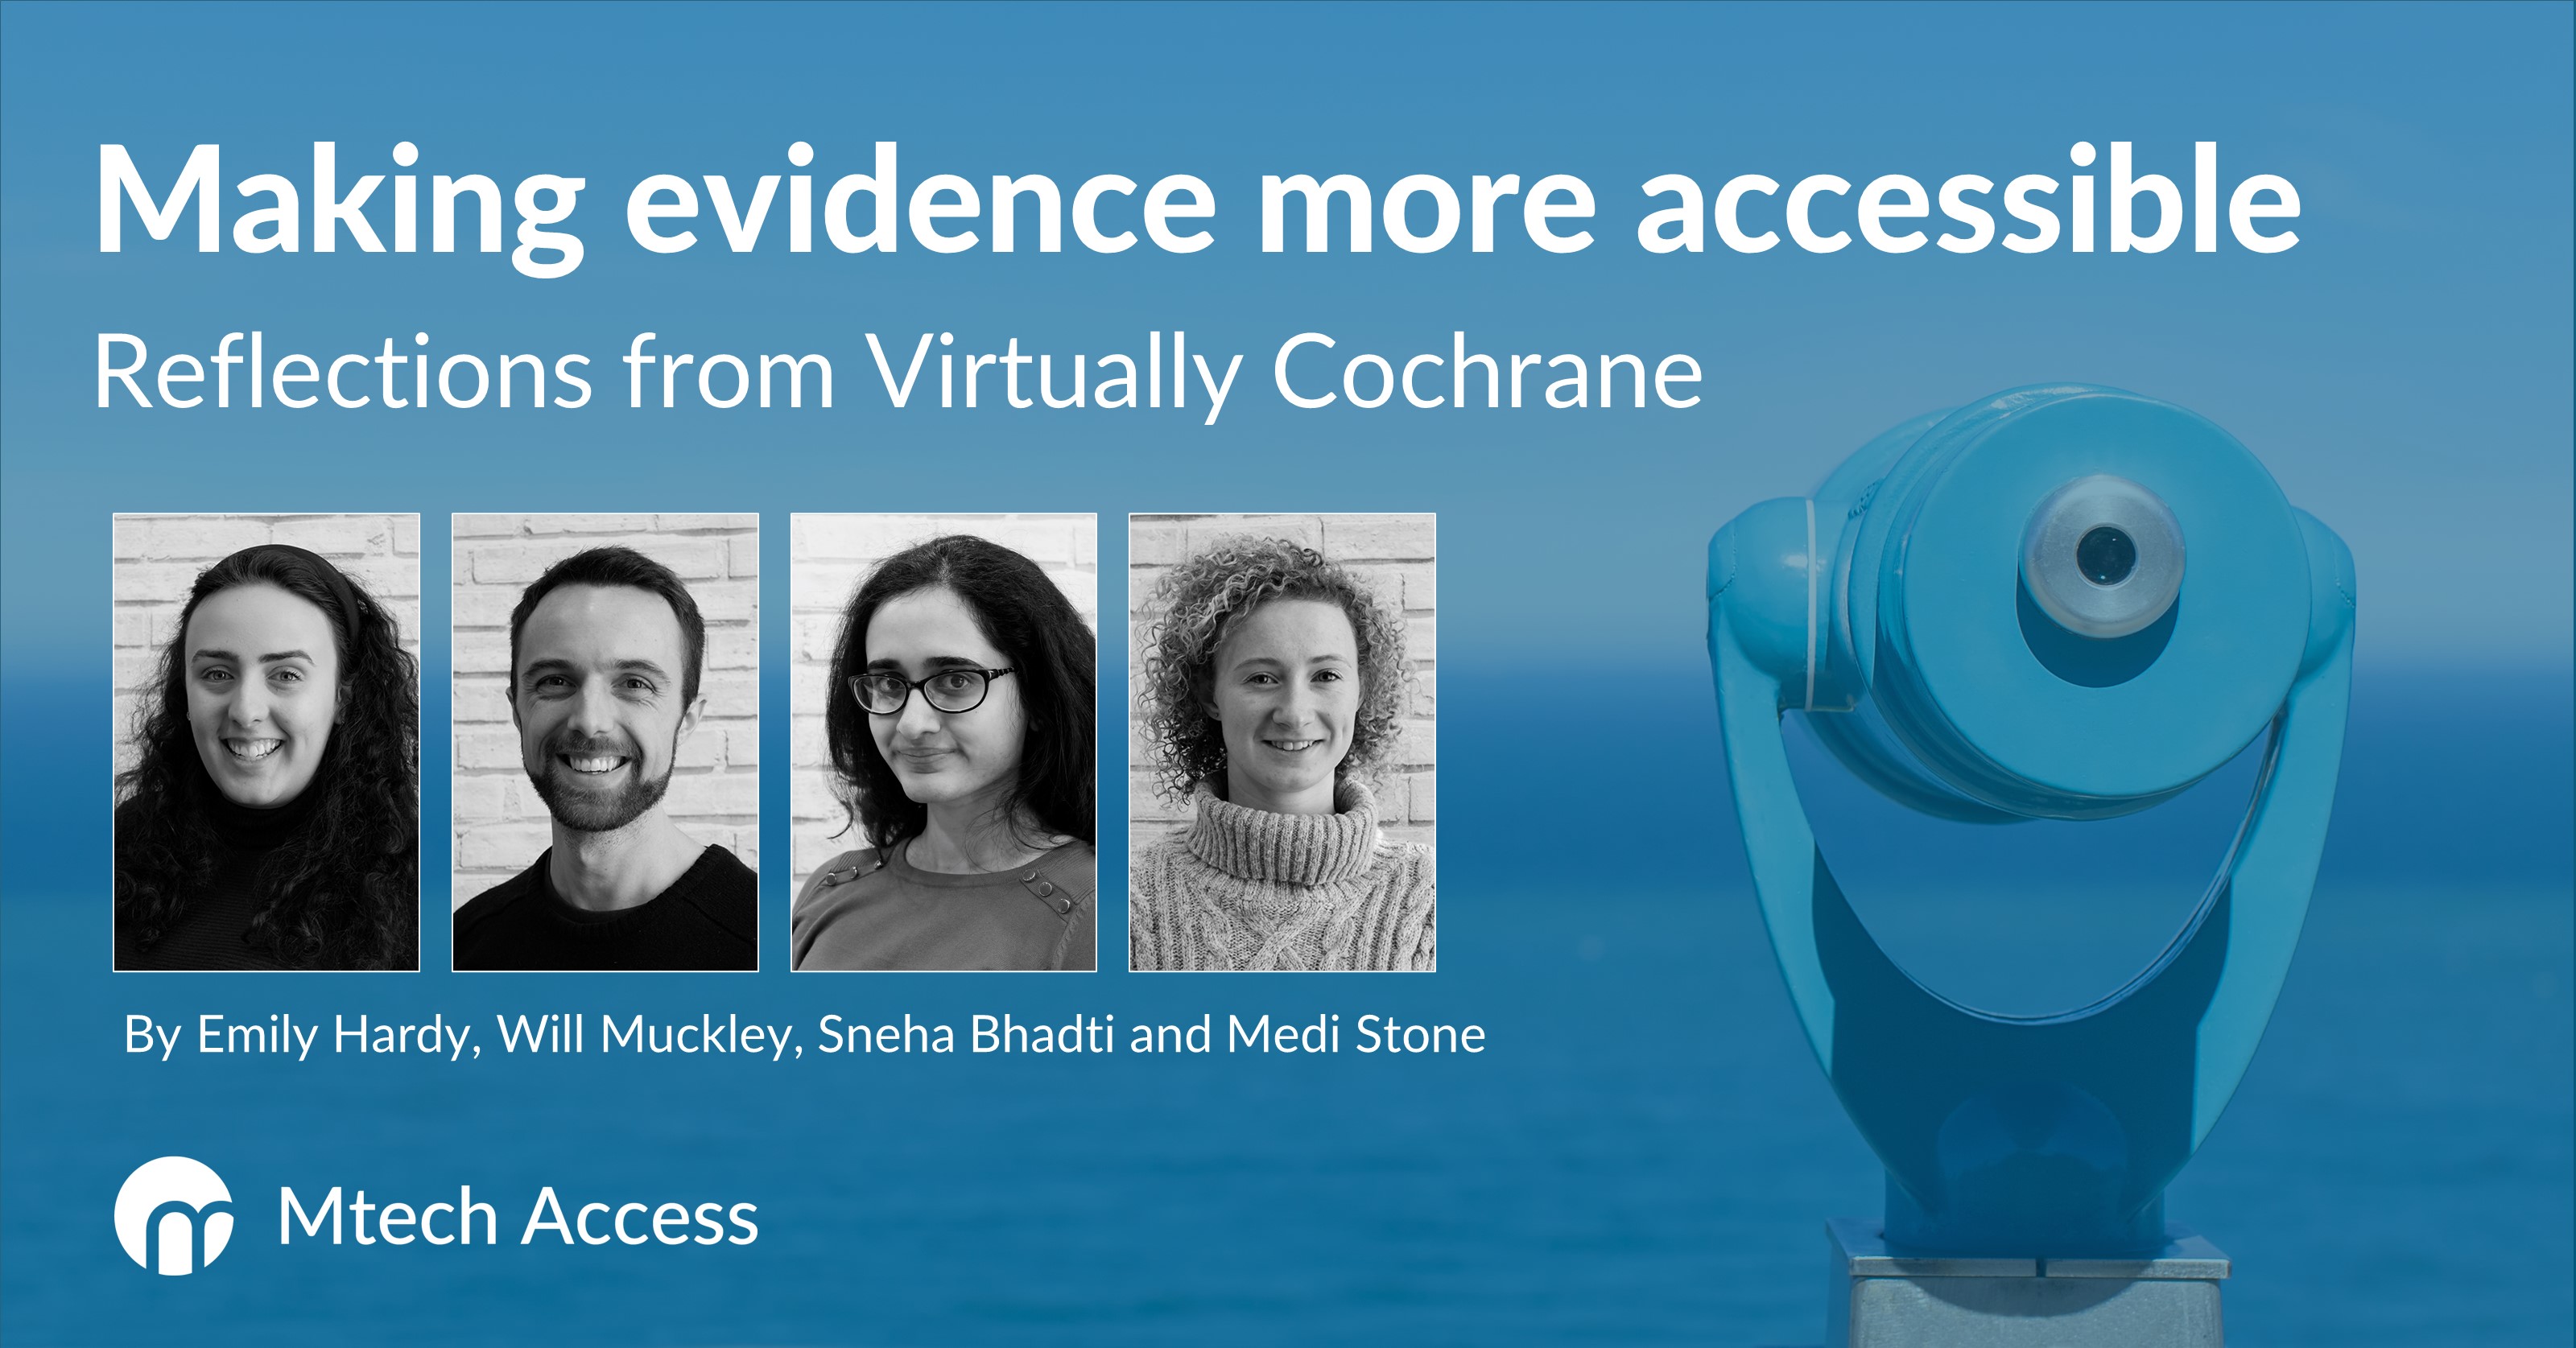 Making evidence more accessible Reflections from Virtually Cochrane